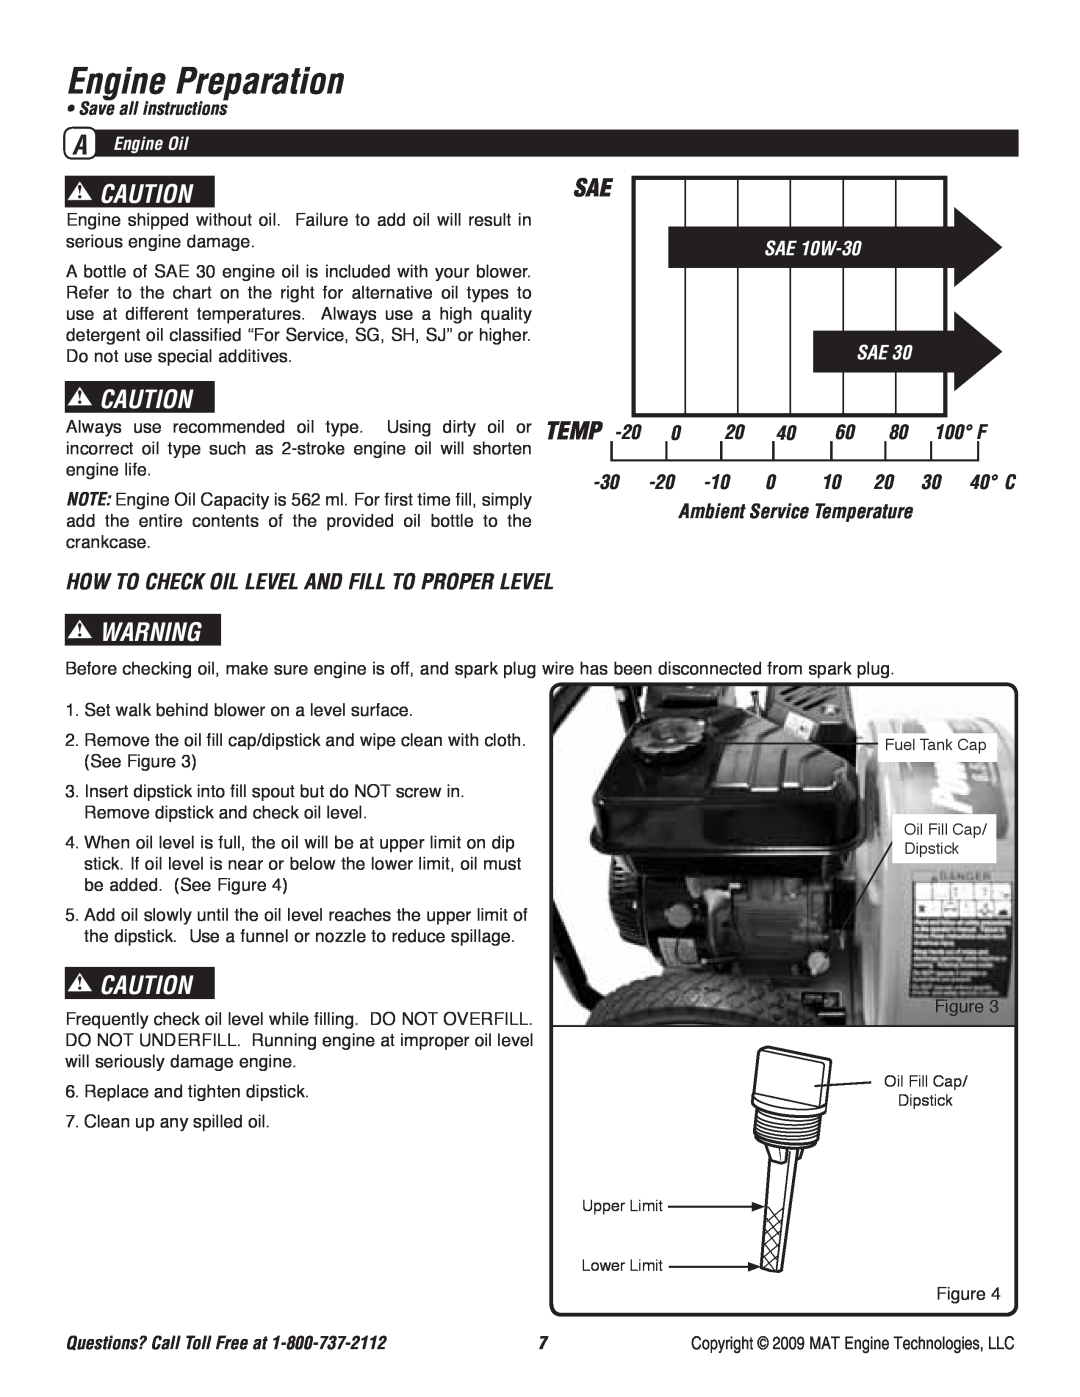 Powermate P-WB-163150-[E] Engine Preparation, Temp, How To Check Oil Level And Fill To Proper Level, SAE 10W-30, 100 F 